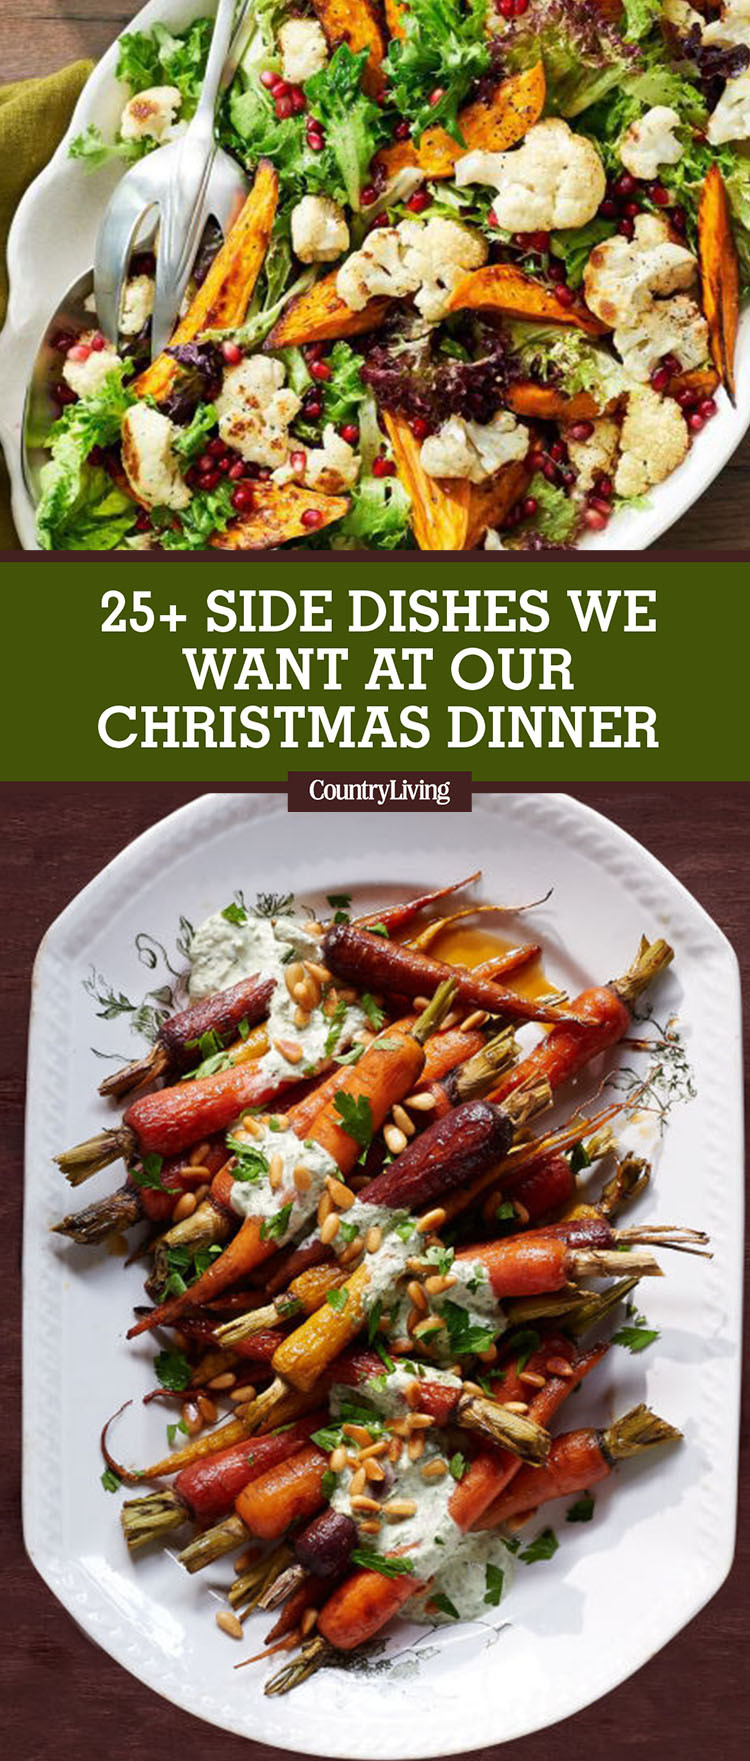 Best Christmas Side Dishes
 30 Easy Christmas Side Dishes Best Recipes for Holiday